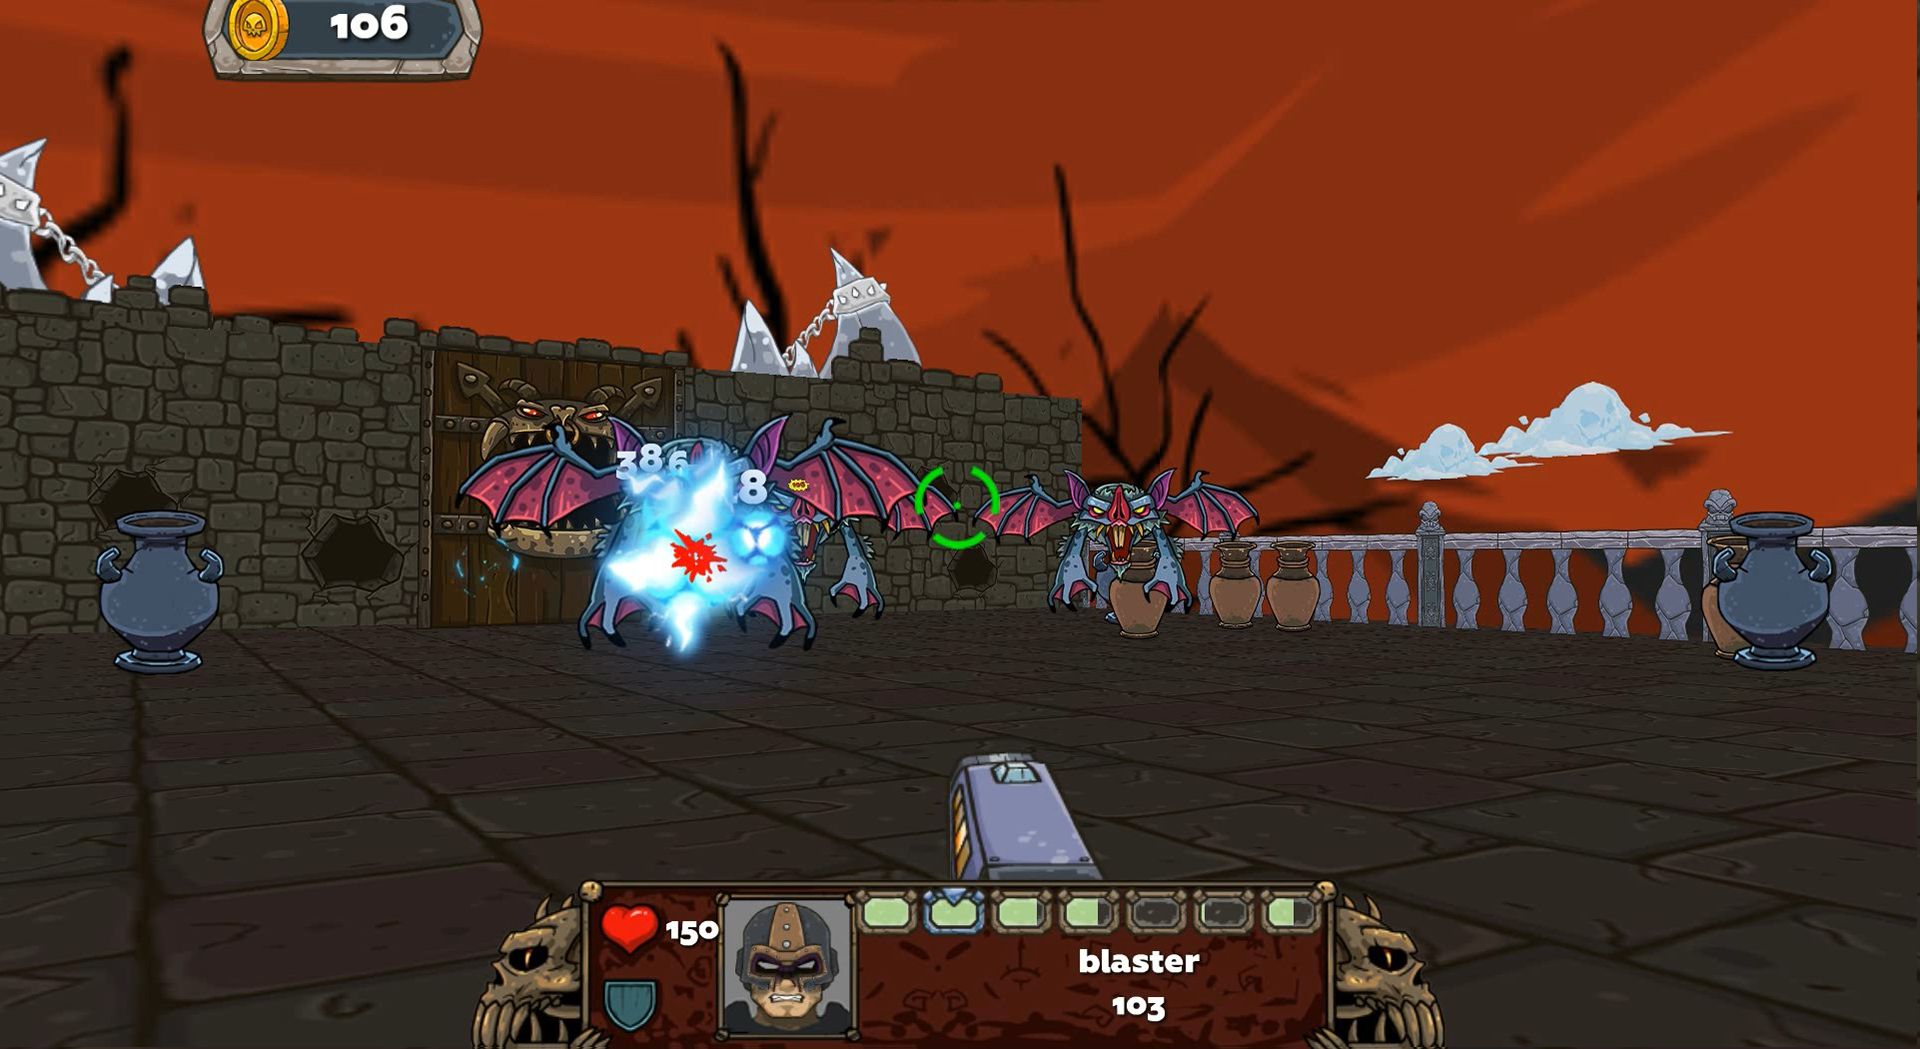 Demon Blast - 2.5d game retro fps for Android